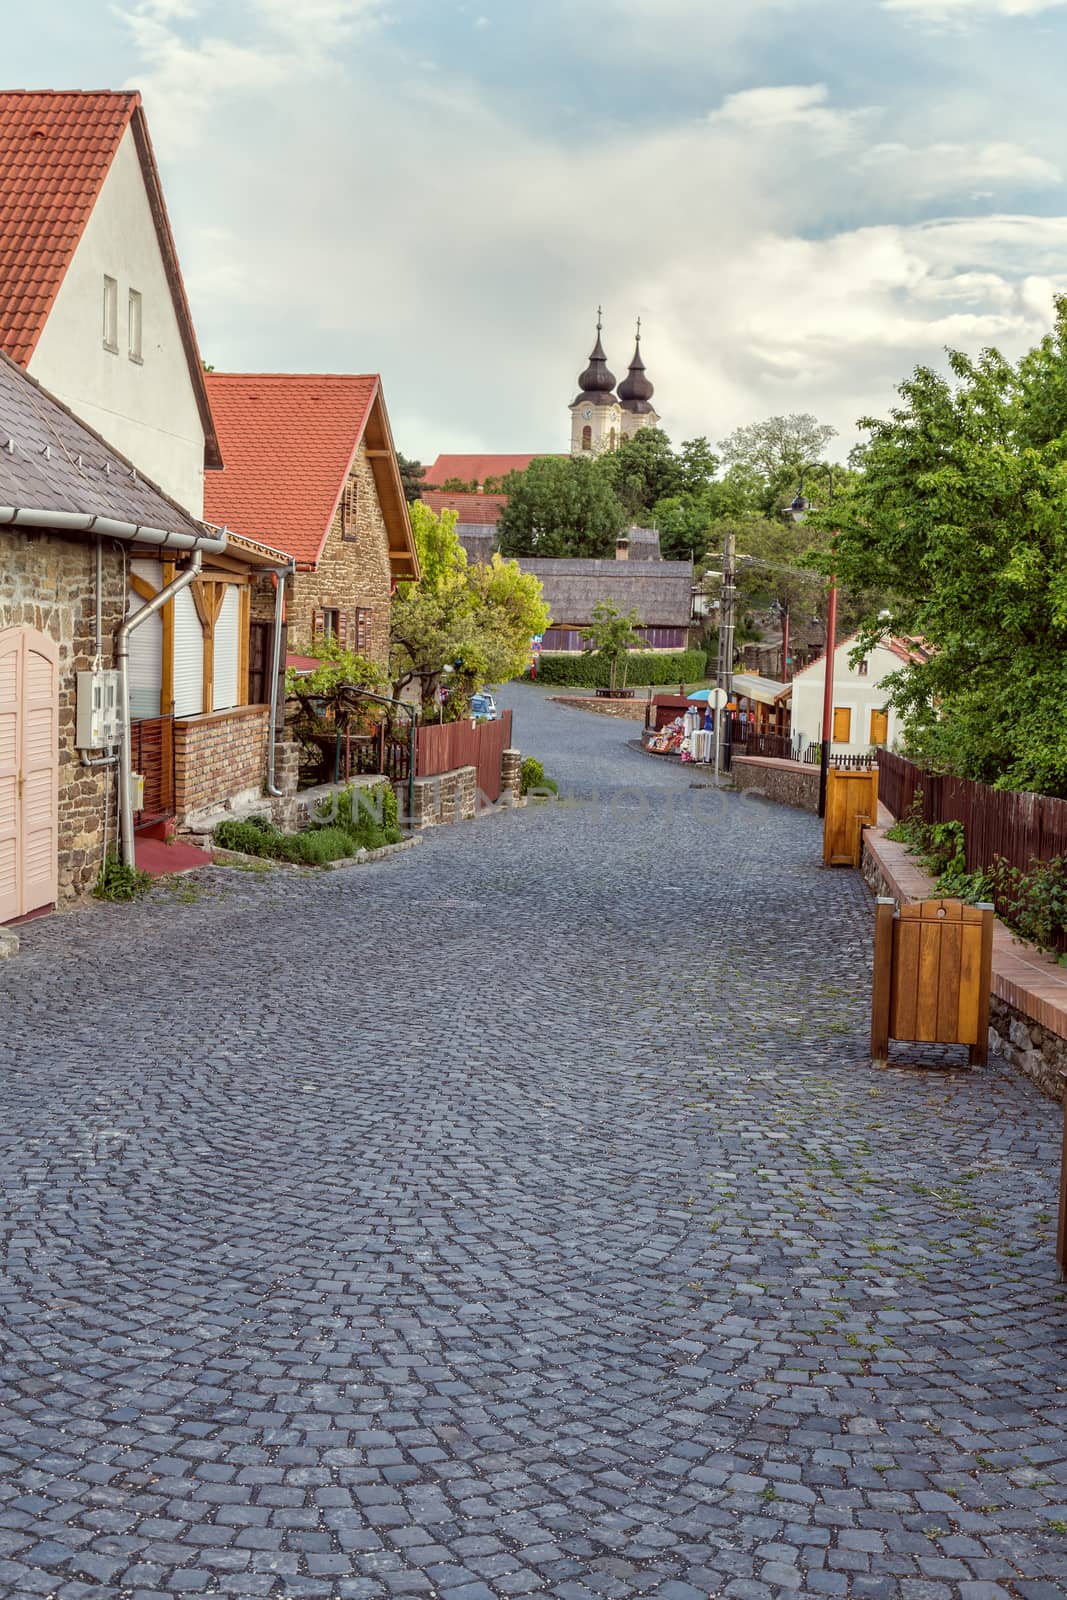 Typical traditional street in the village Tihany by Digoarpi